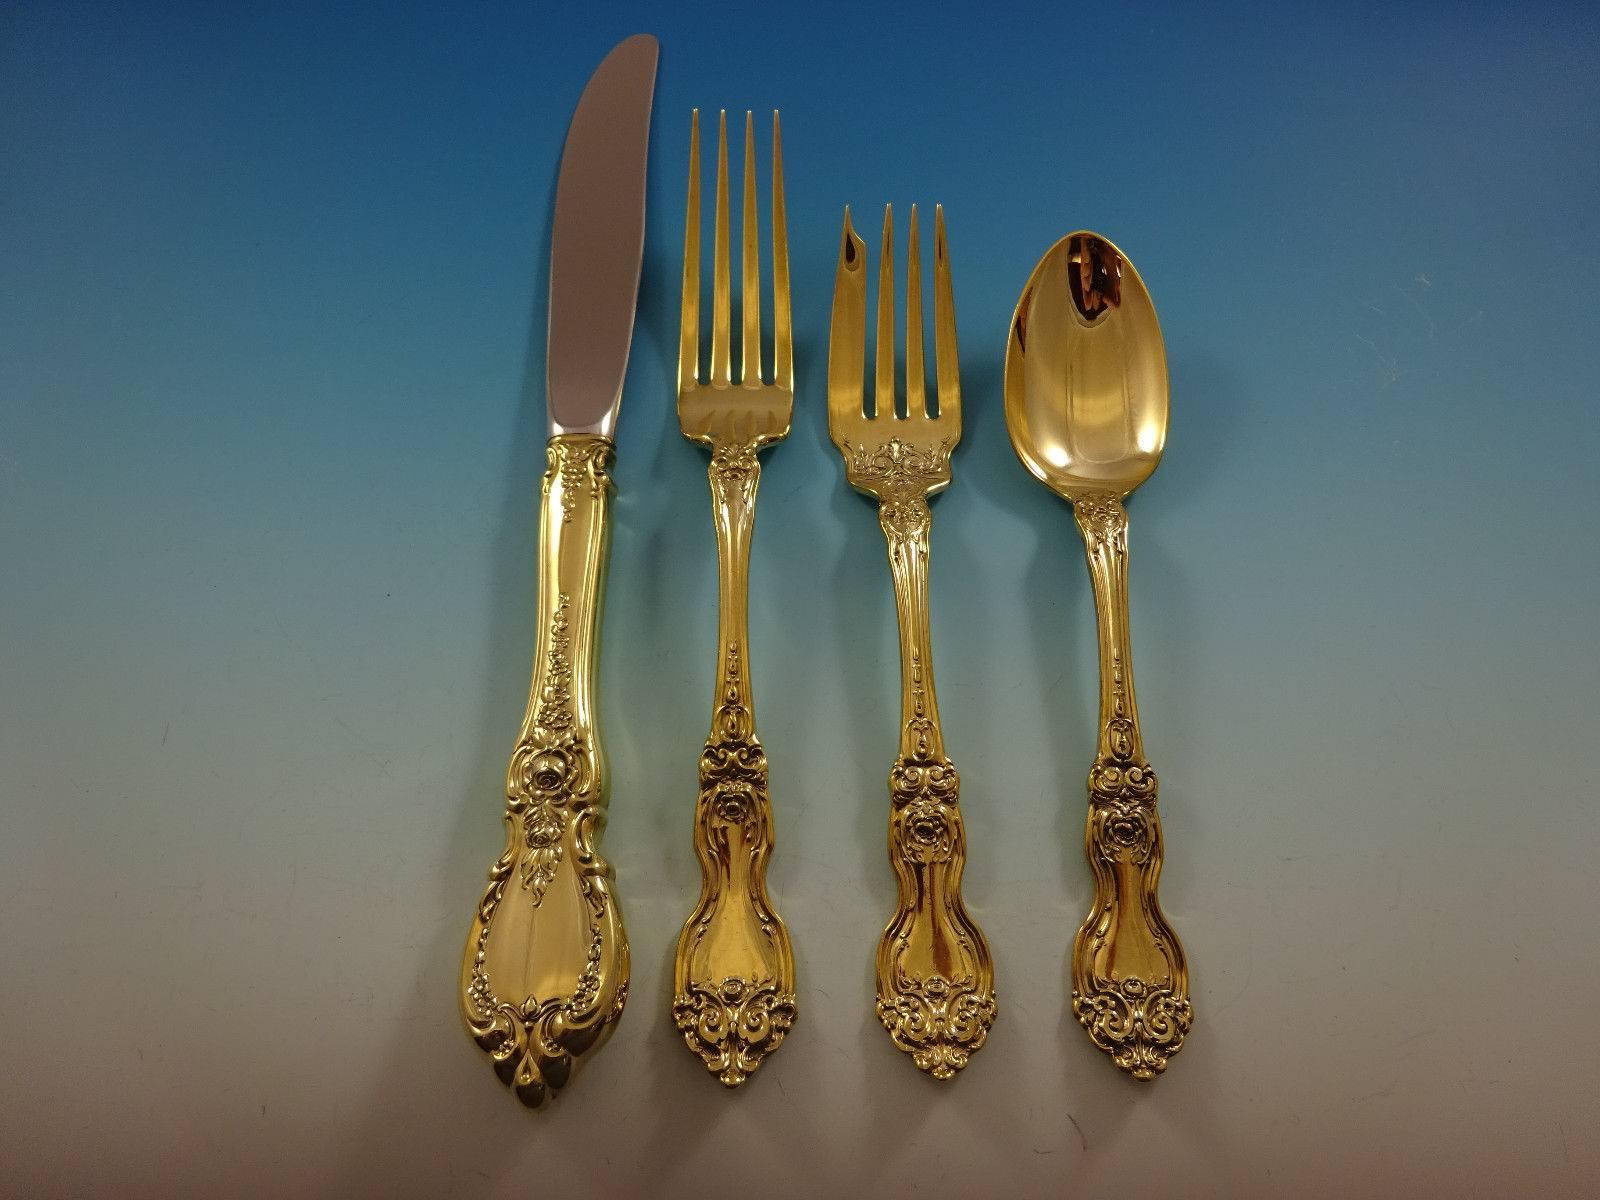 La Reine Vermeil (completely gold-washed) by Wallace sterling silver flatware set, 32 pieces. This set includes: 

Eight knives, 9